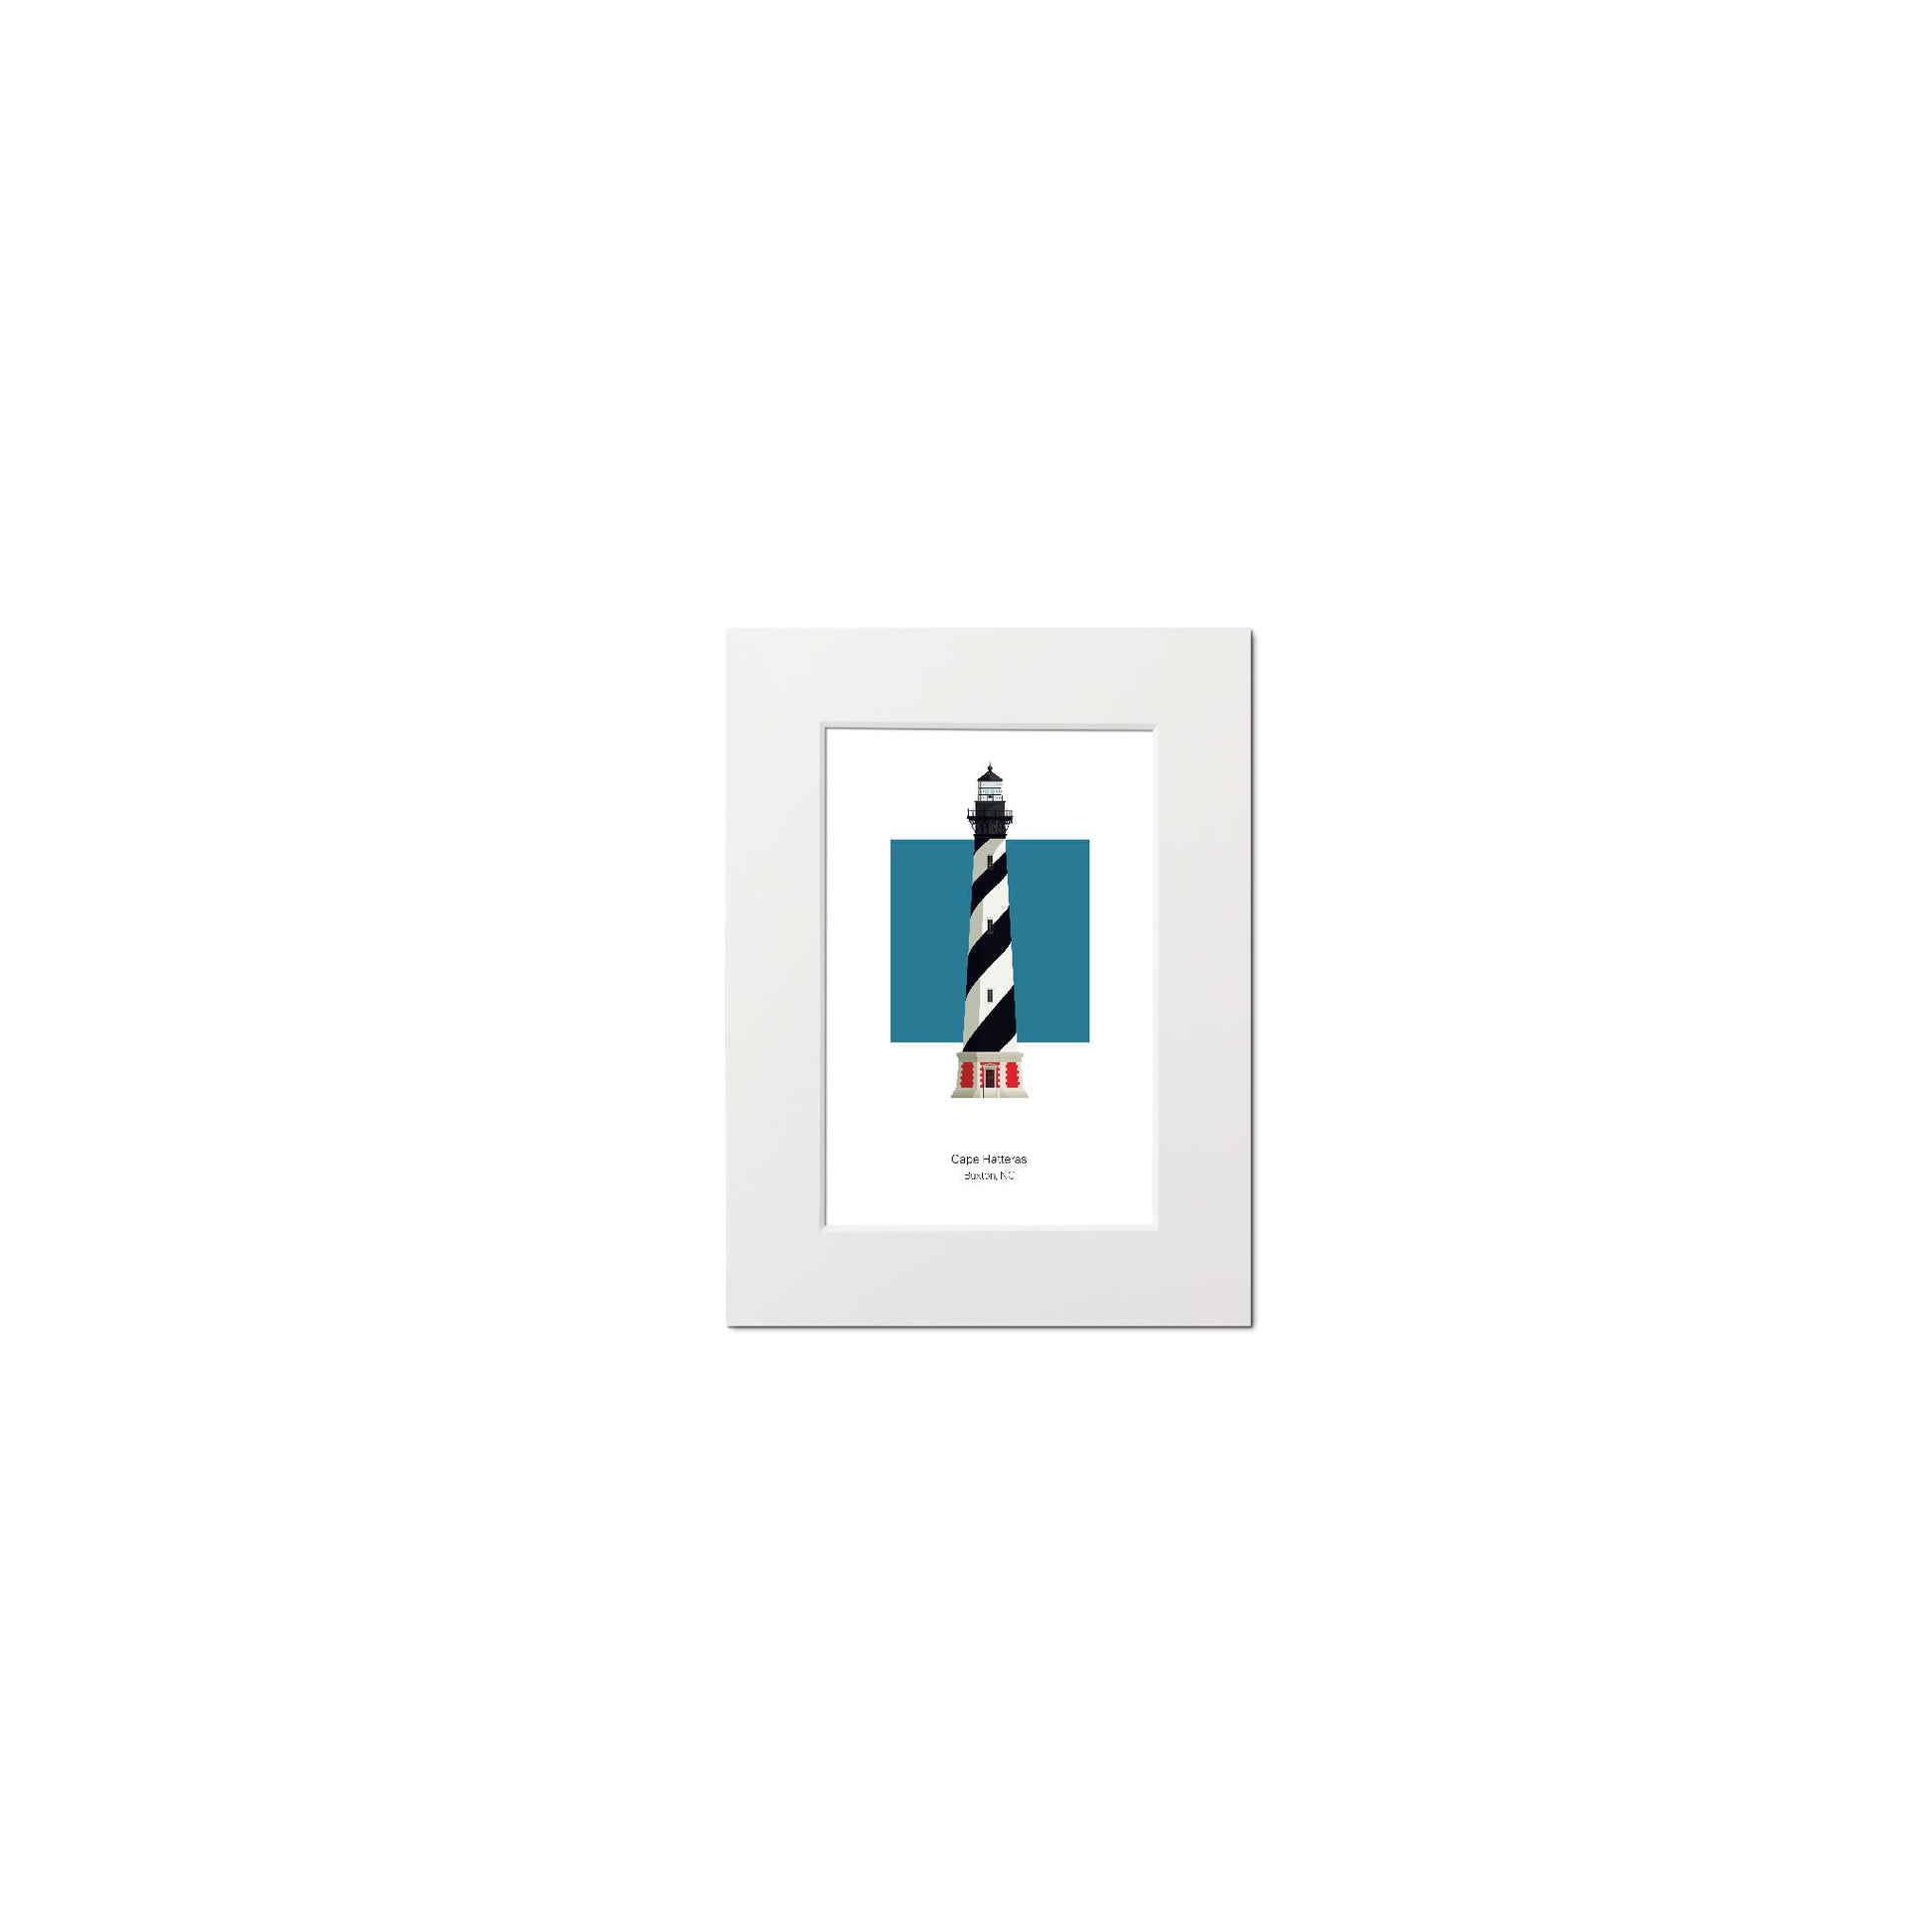 Illustration of the Cape Hatteras lighthouse, North Carolina, USA. On a white background with aqua blue square as a backdrop., mounted and measuring 6"x8" (15x20cm).